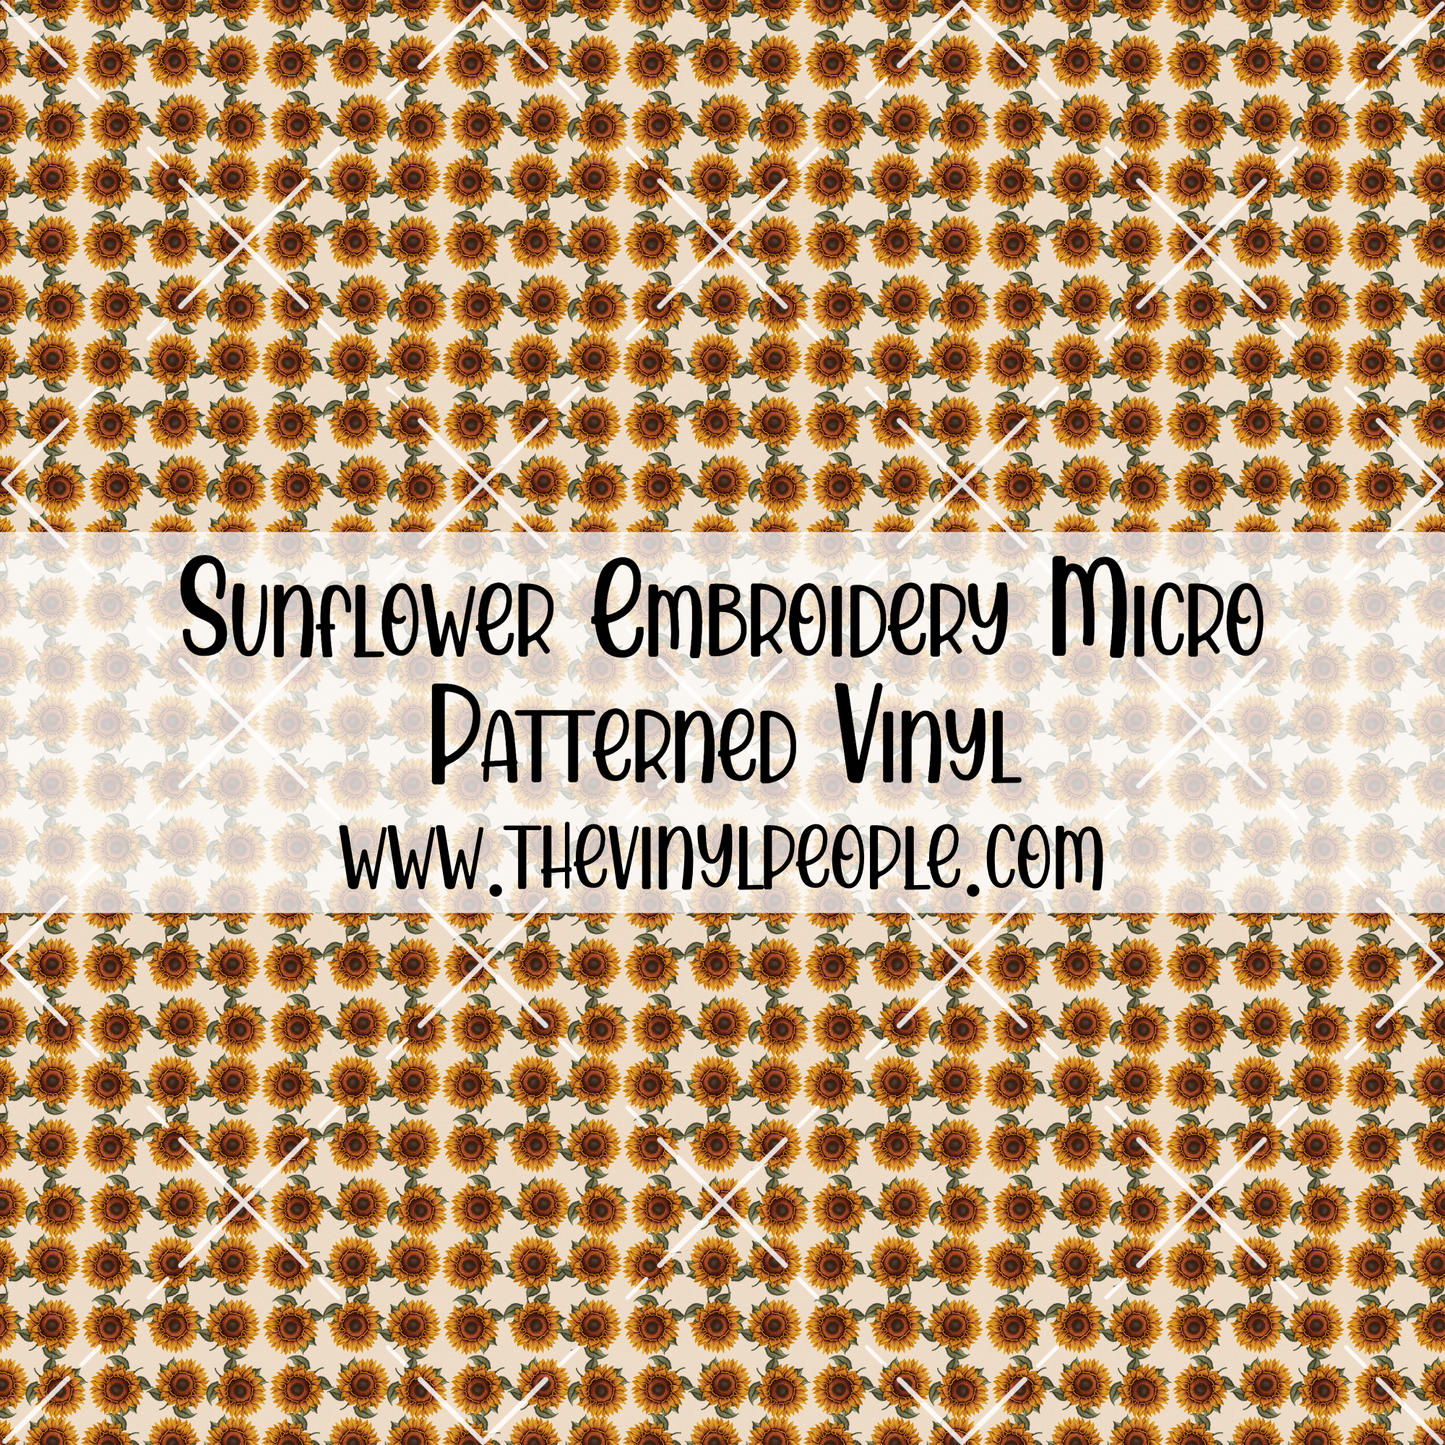 Sunflower Embroidery Patterned Vinyl